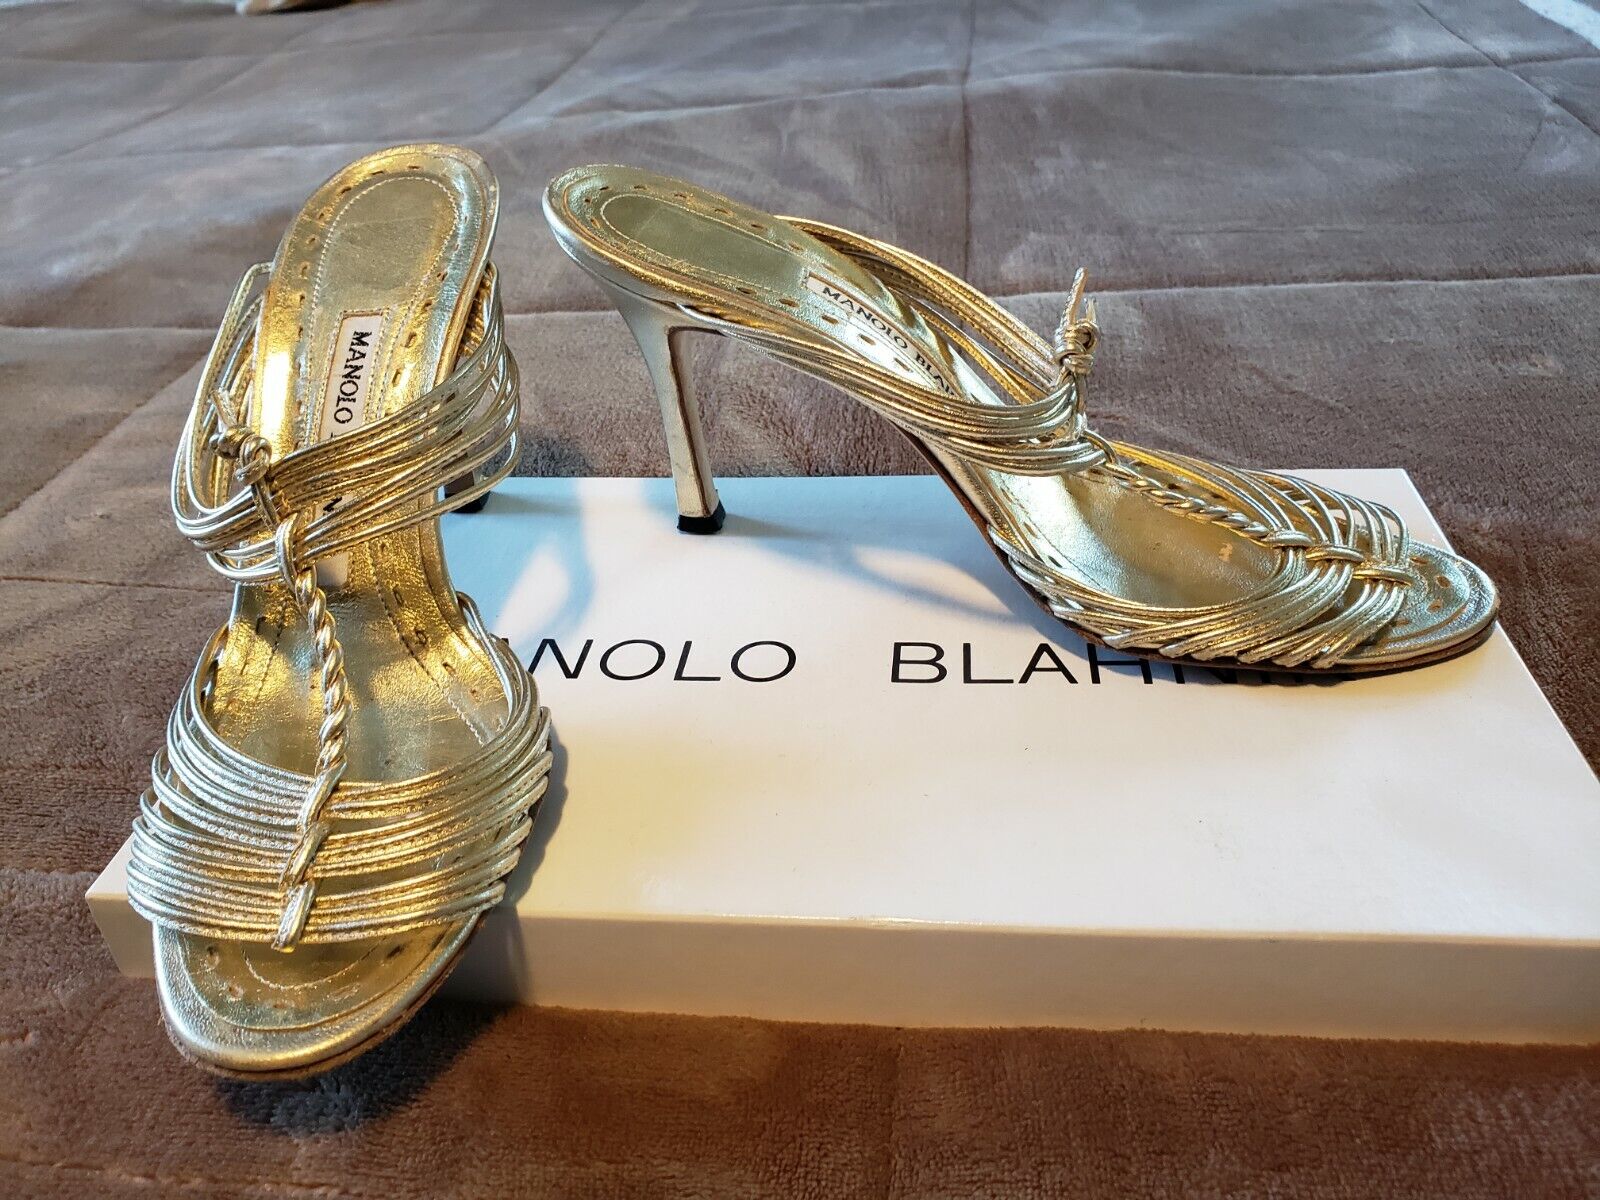 Manolo Tulsa Mall Blahnik Gold Leather Strappy Award Sandals Size Heels 37 Shoes